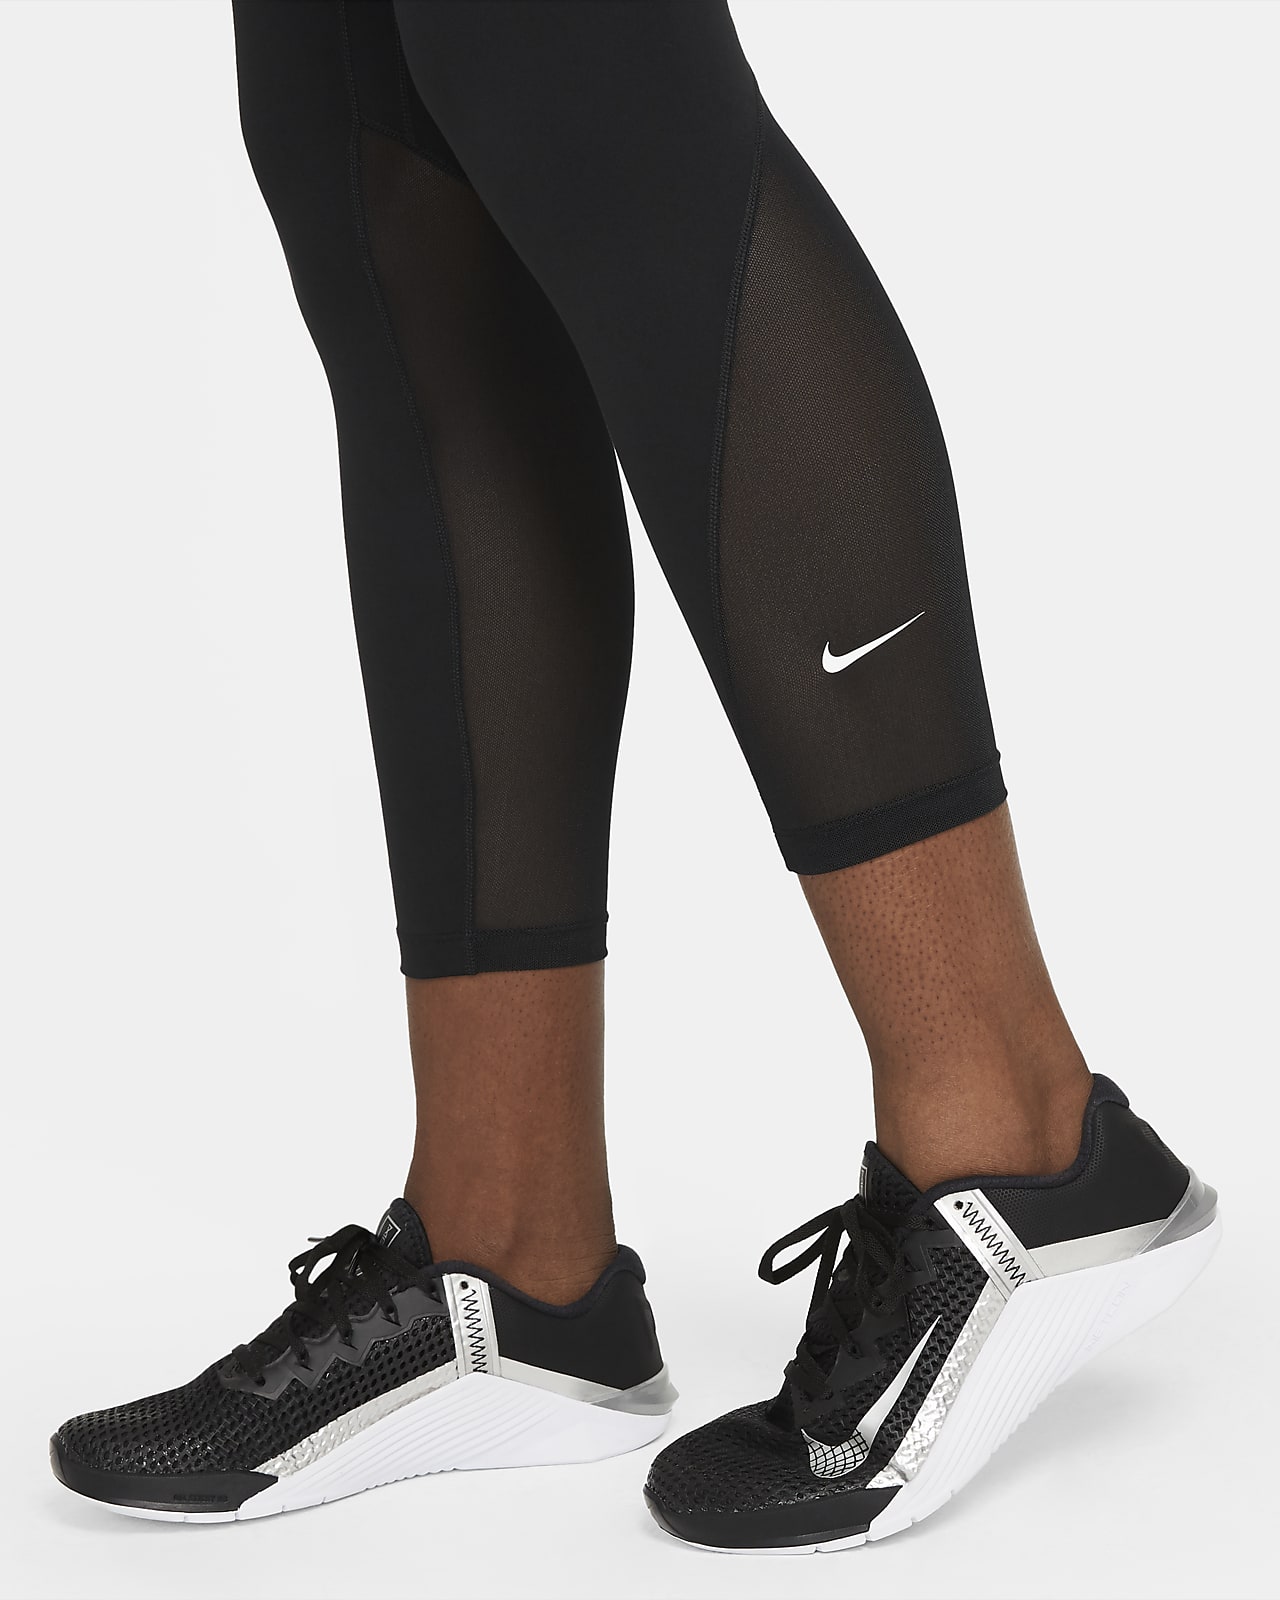 The Nike One Tight Fit Women's 7/8 Leopard Print Training Tights CK3072-010